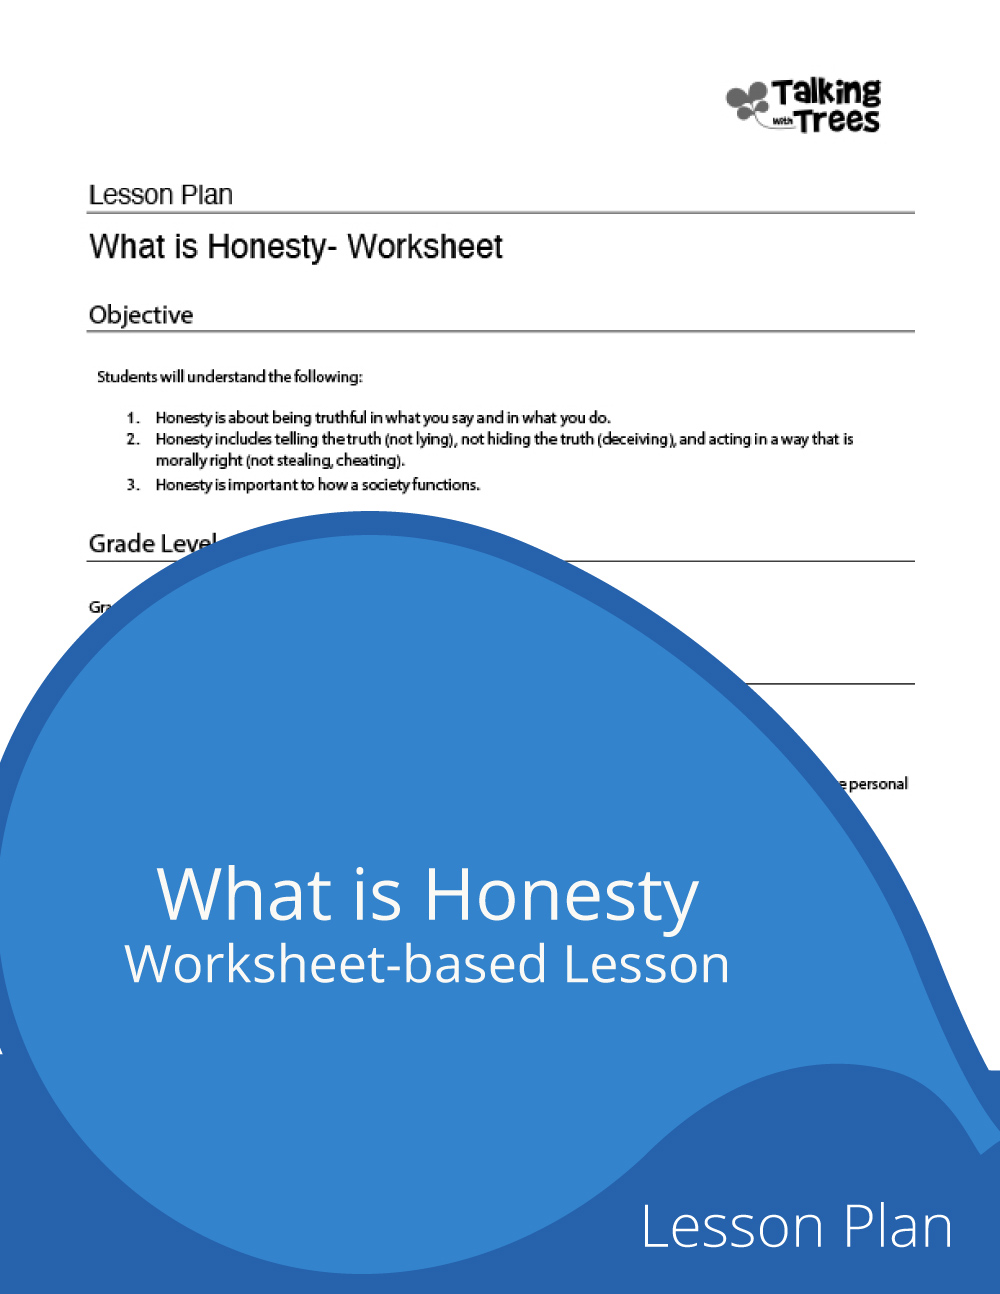 What is Honesty Lesson Plan - Worksheet for Grades 2-4